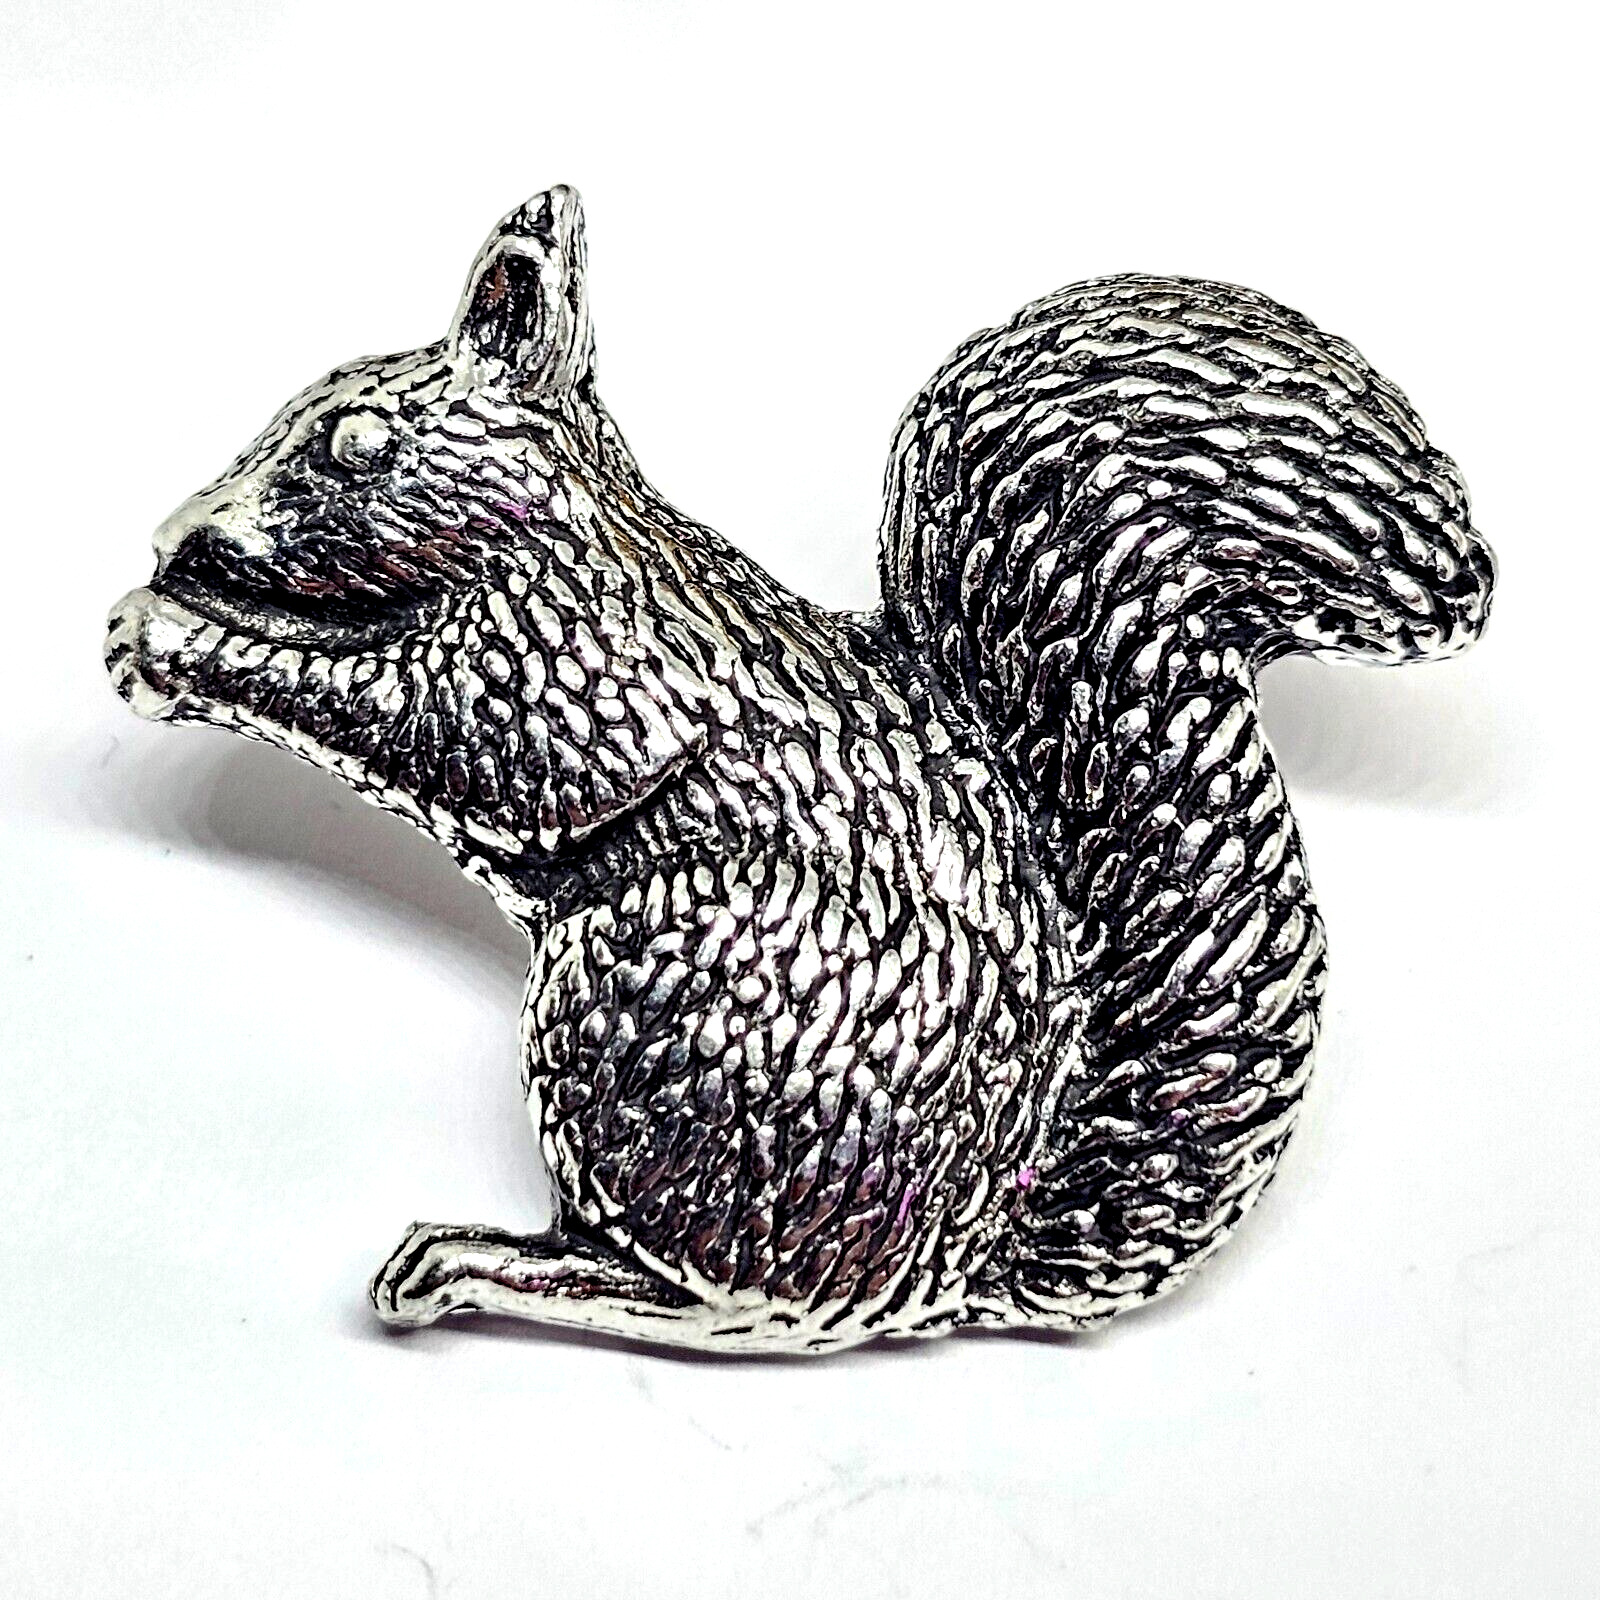 Squirrel Pin Badge Pewter Cute Brooch Pin Badge Made By Famous A R Brown UK Made